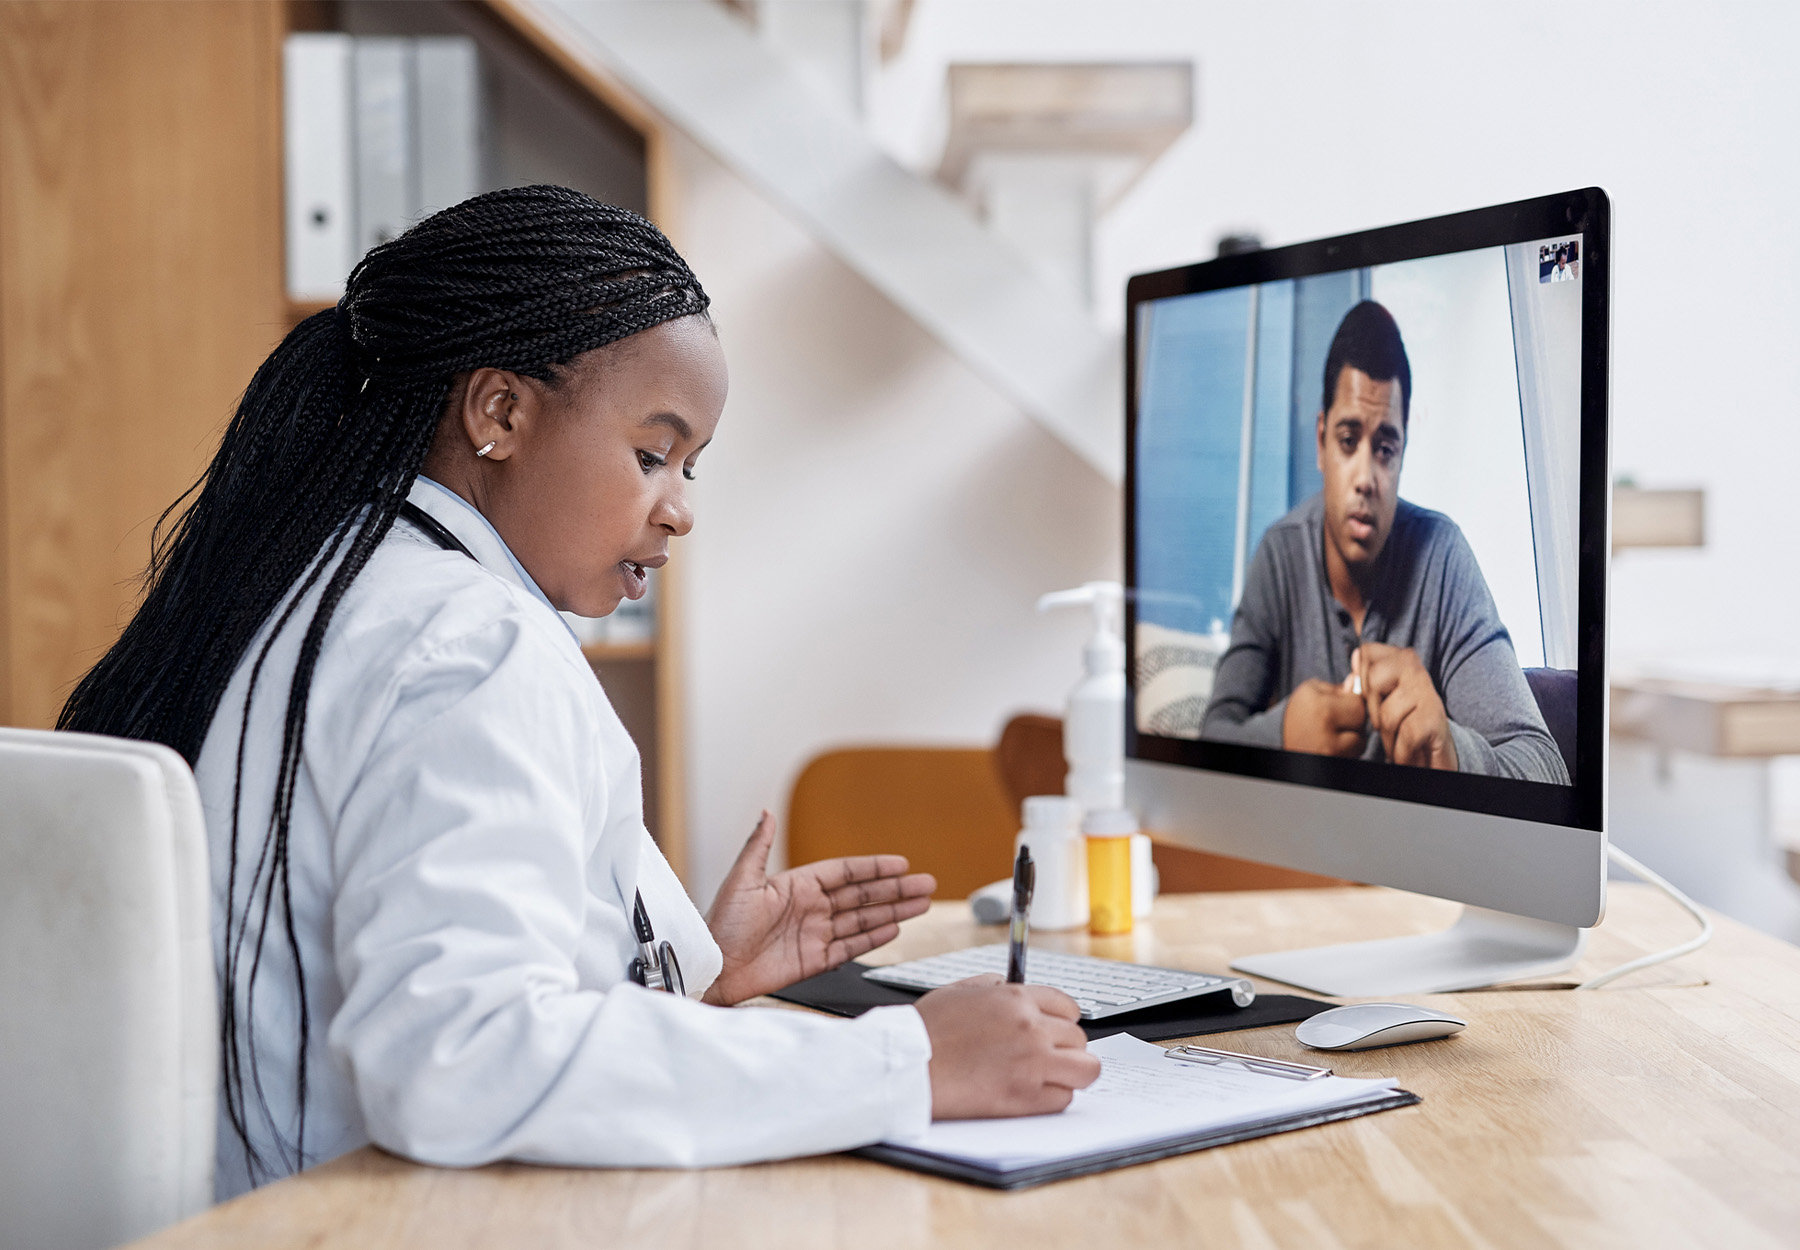 Stock photo of a young doctor writing notes during a video call with a patient on a computer